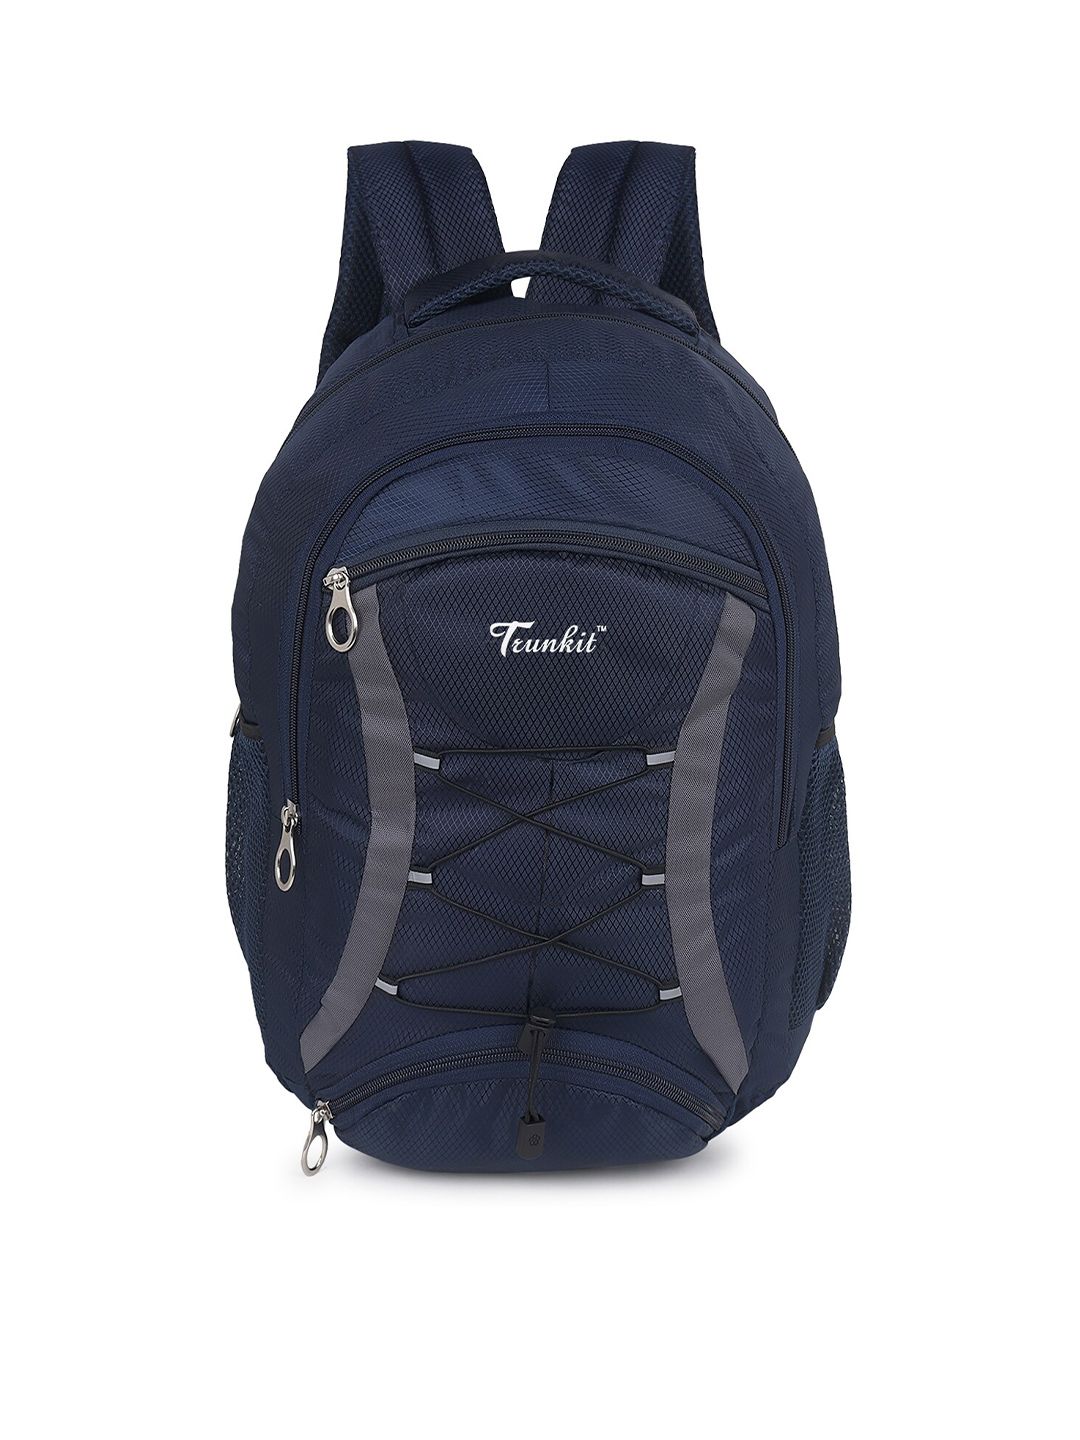 TRUNKIT Unisex Blue Backpack Price in India